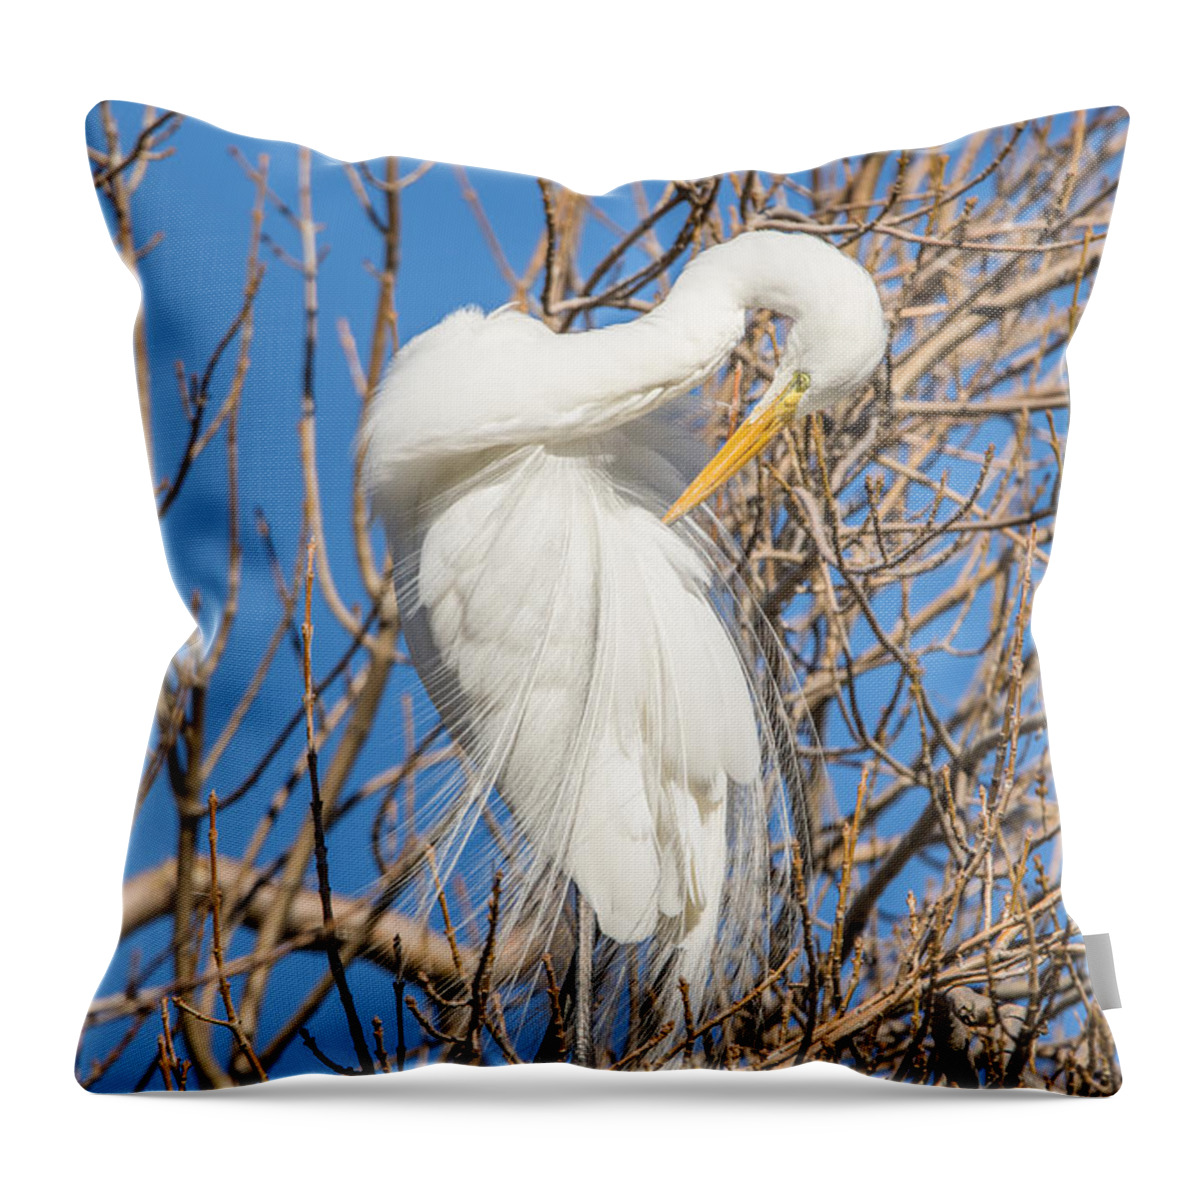 California Throw Pillow featuring the photograph Great White Egret in Tree by Marc Crumpler